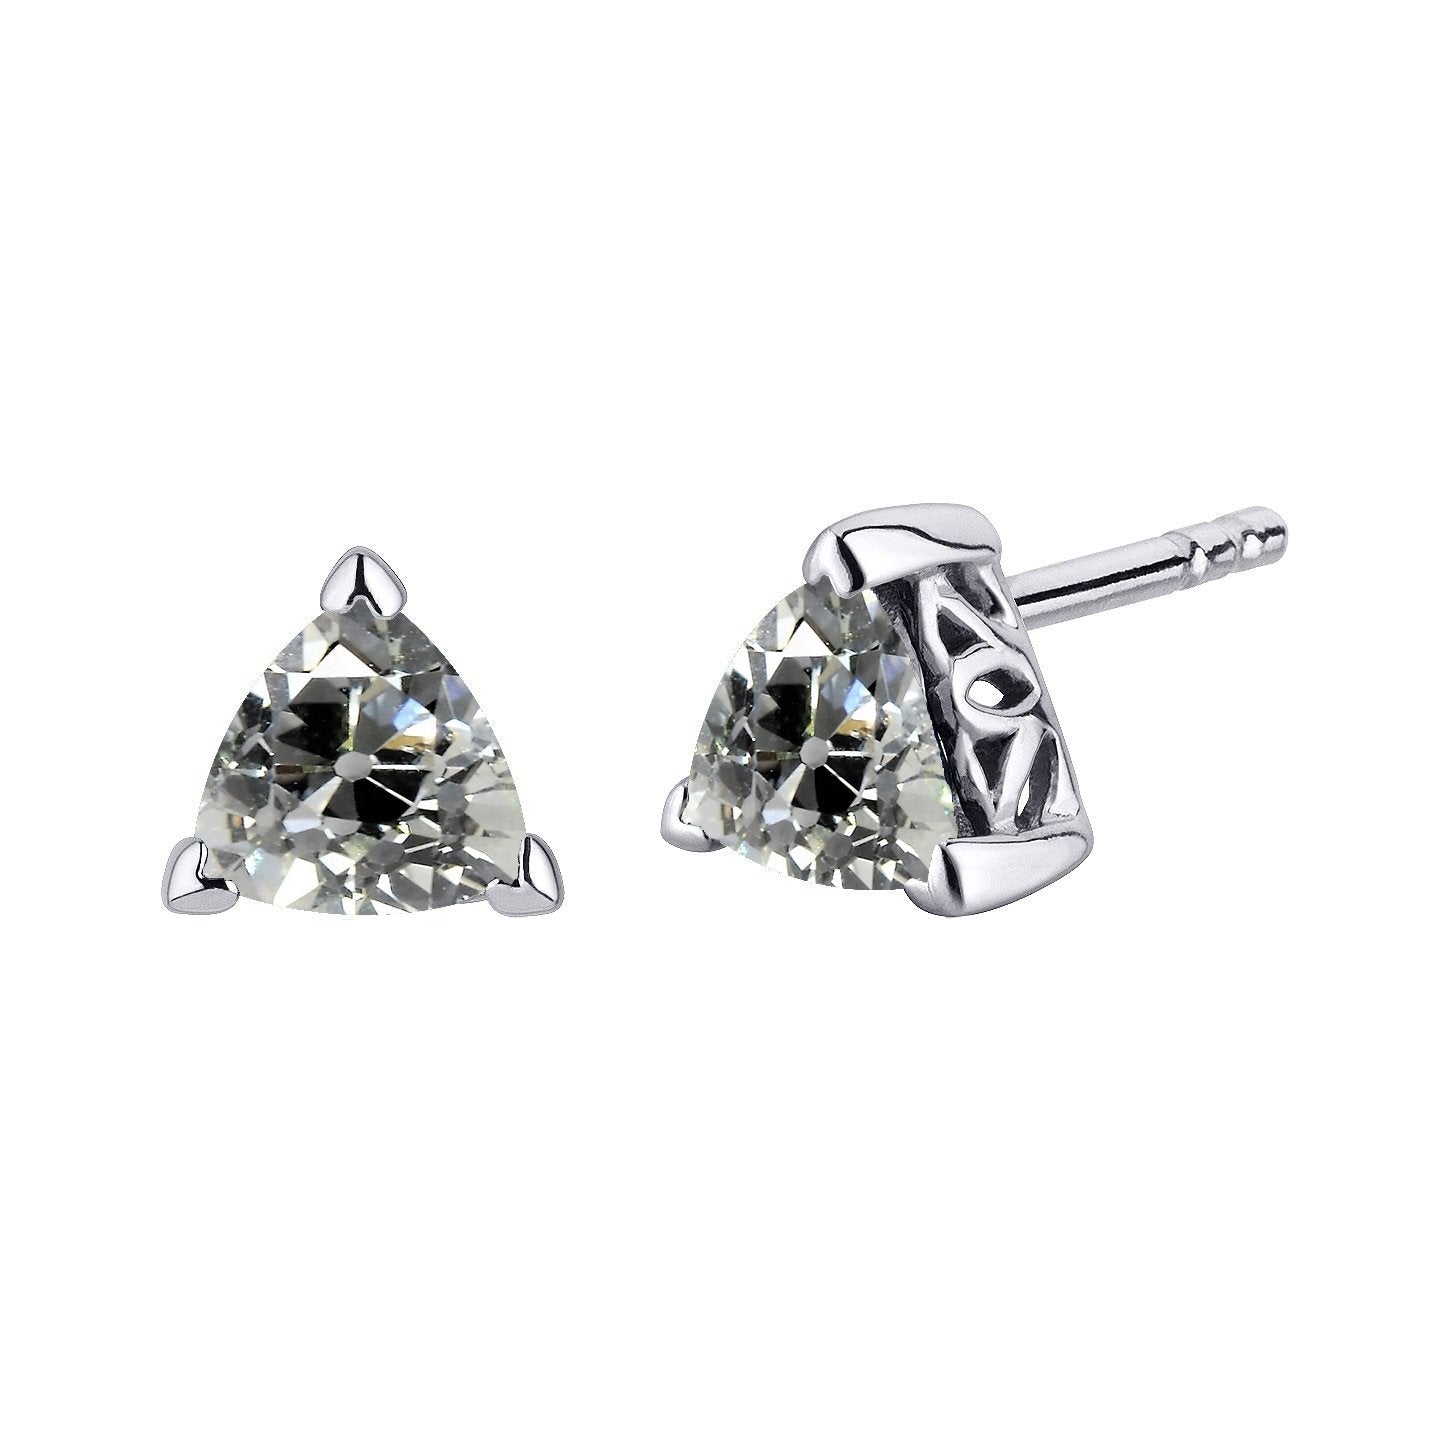 Real Diamond Studs Trillion Old Miner Solitaire Earrings 3 Carats Gold 14K